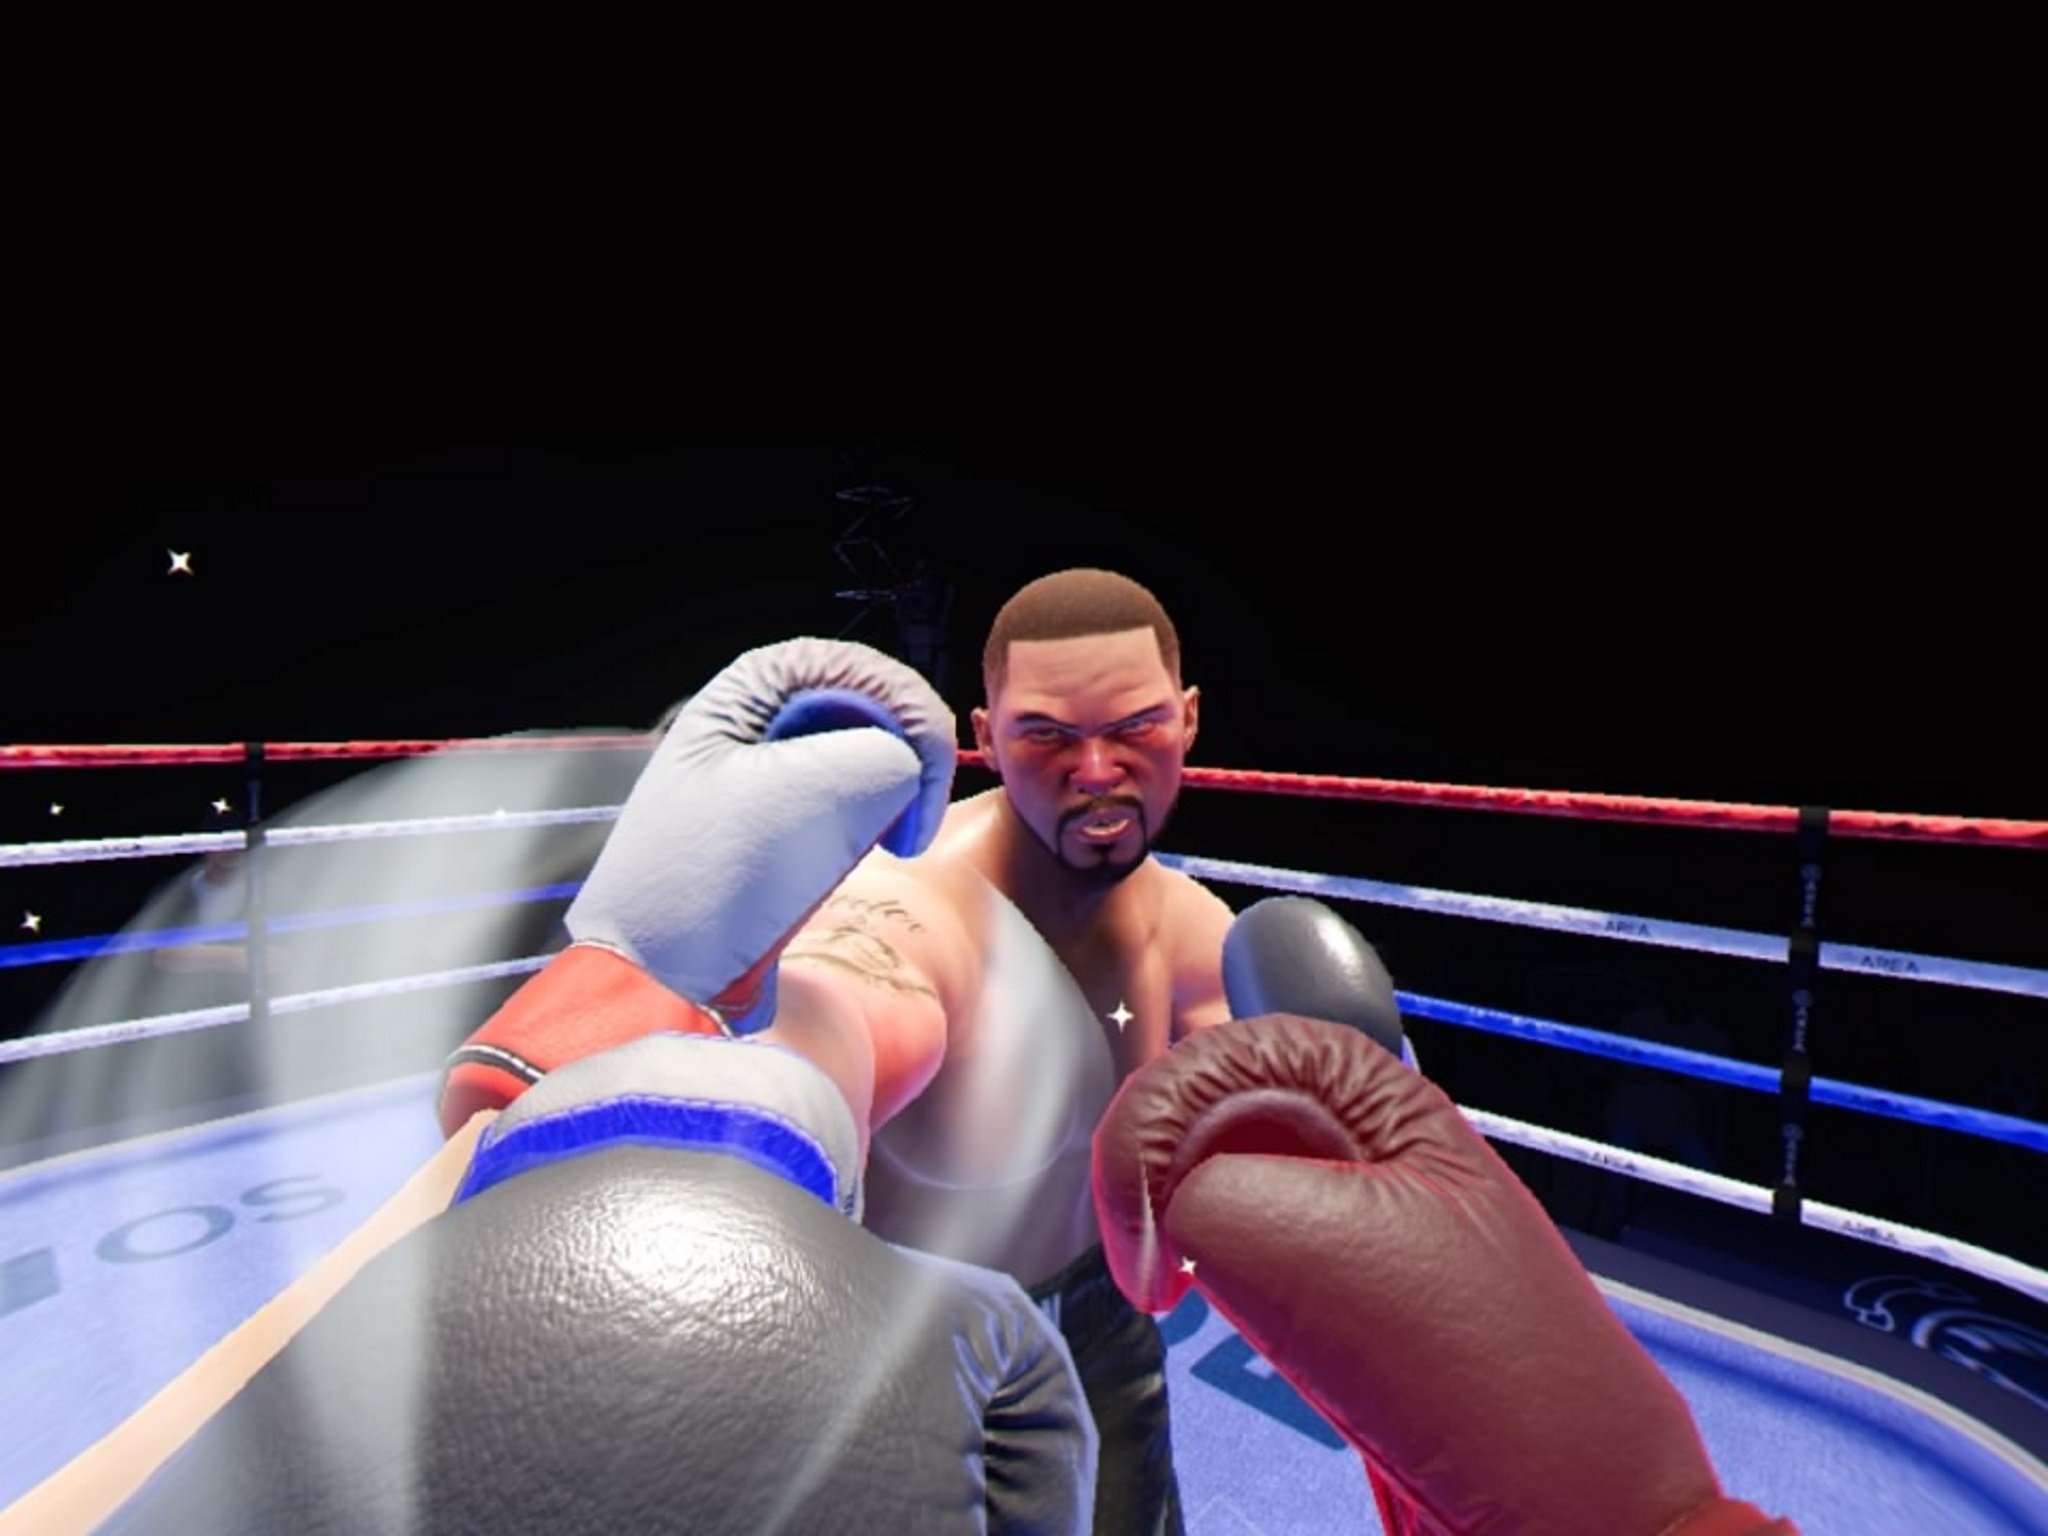 Rise to glory vr. Creed VR. Игра Creed Rise to Glory в VR. Бокс VR Creed. Creed: Rise to Glory (2018).